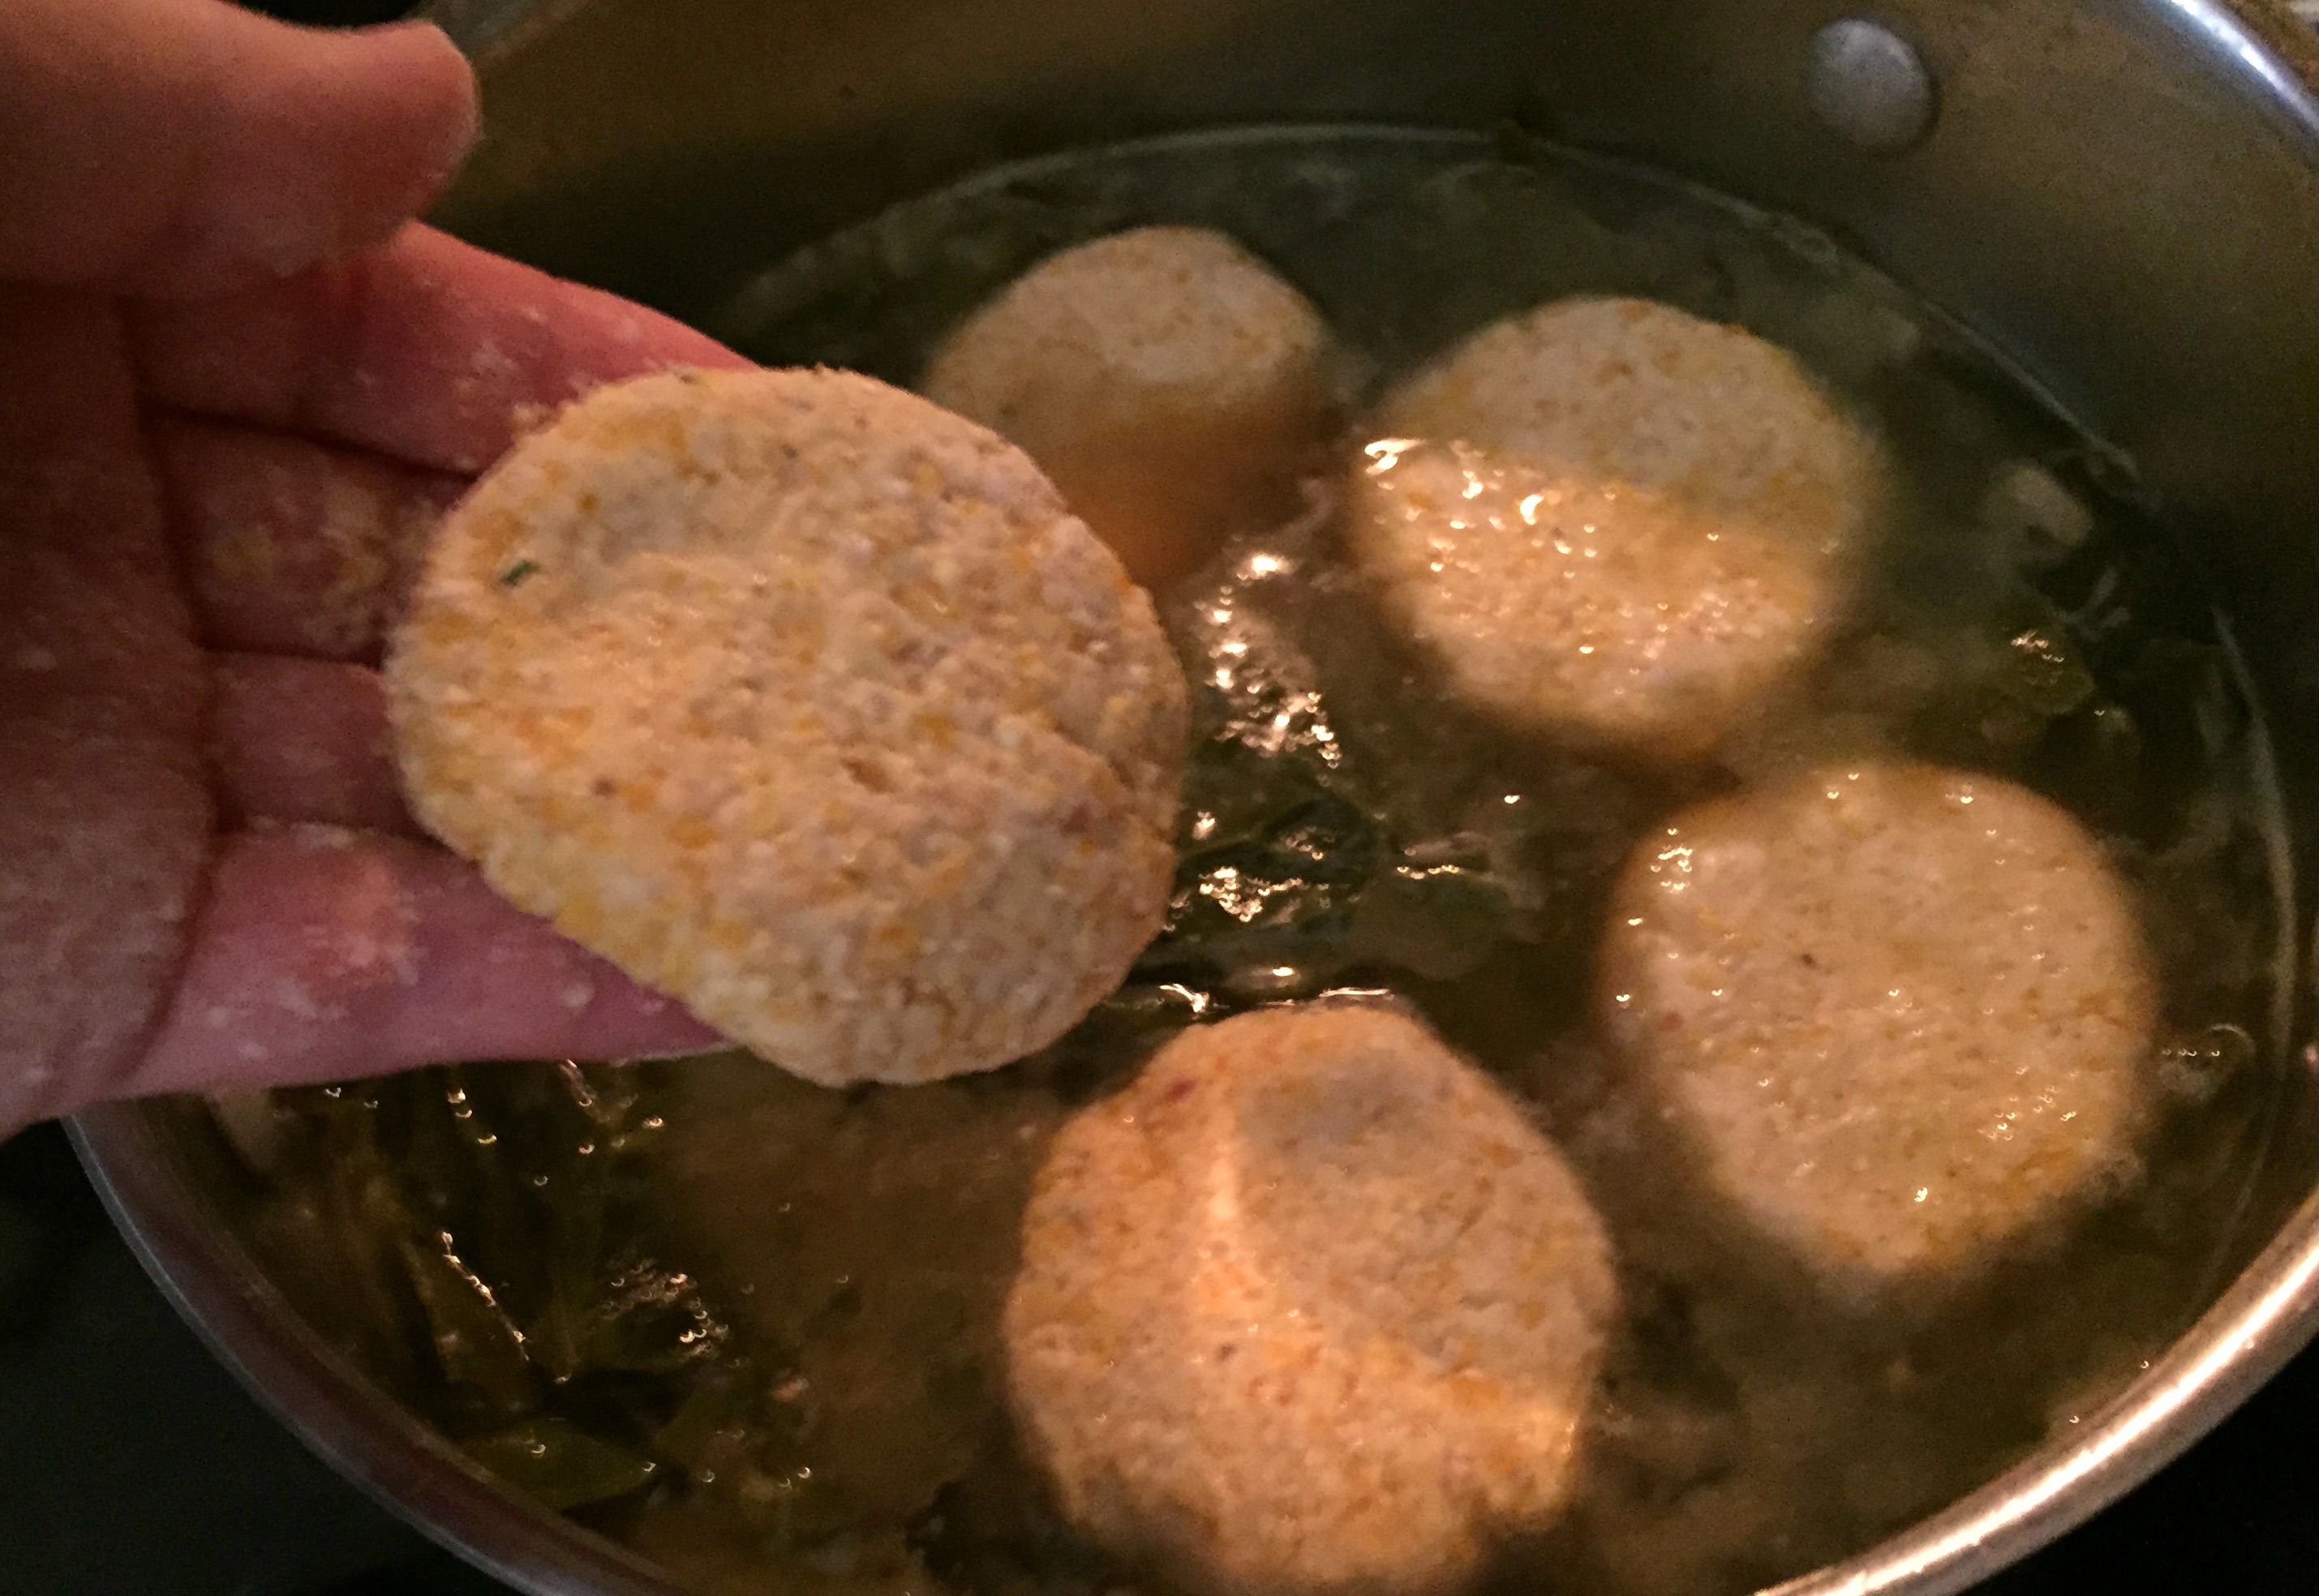 Whether you shape cornmeal dumplings by hand or slice them, they should be about 2 inches in diameter and about 1/2 to 1 inch thick but no more than 2 inches. Photo: Liz Biro